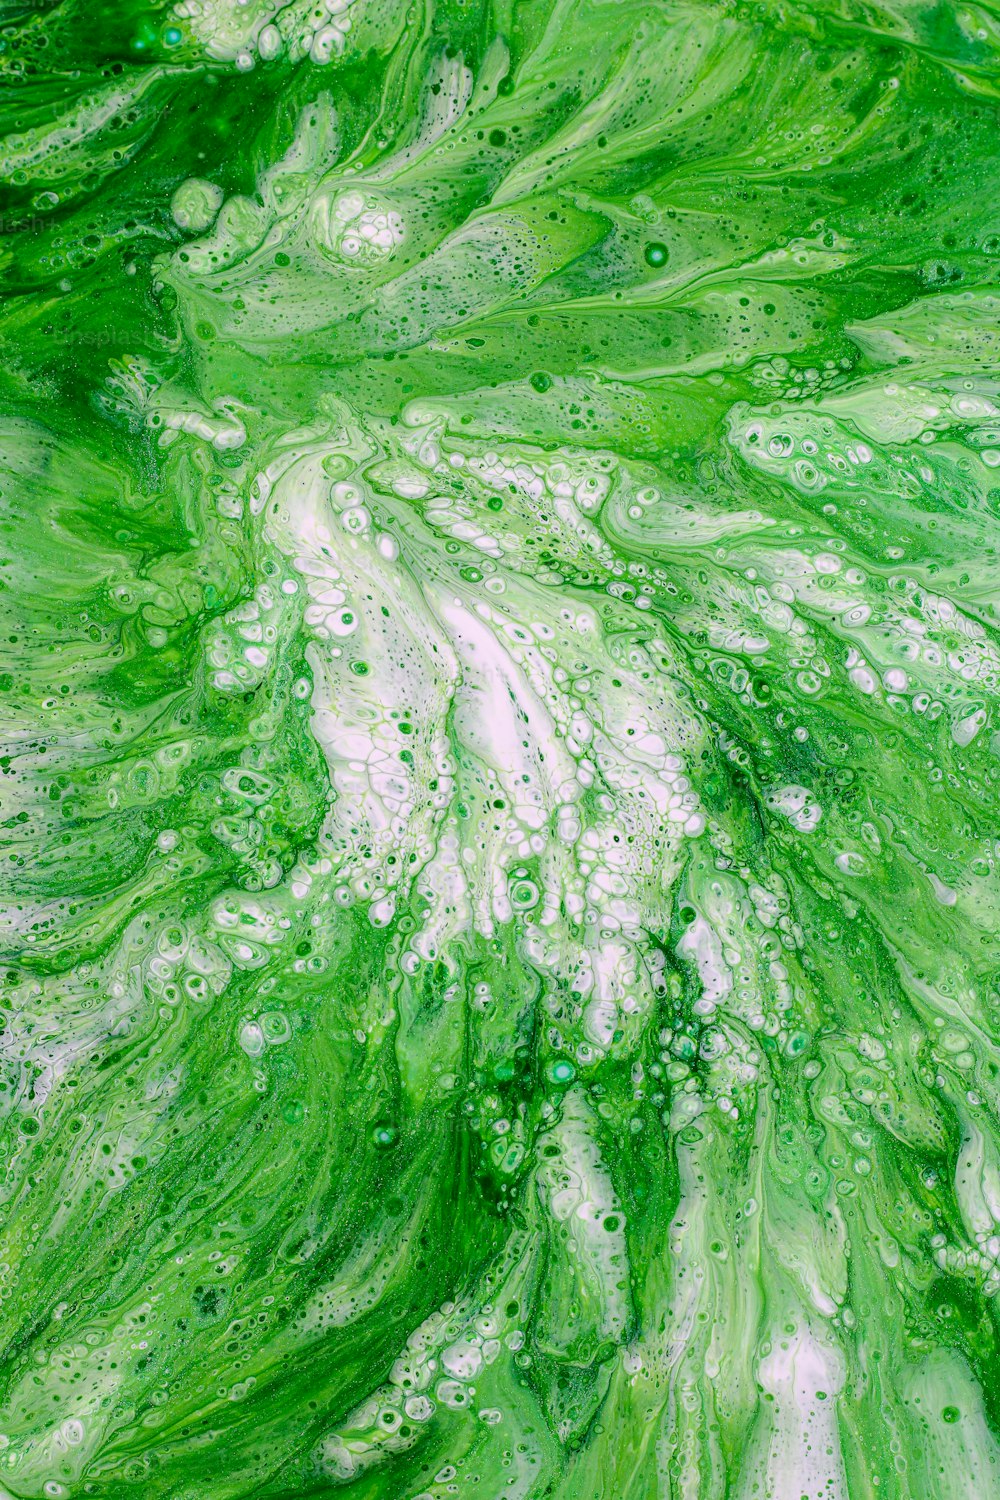 a close up of a green and white substance